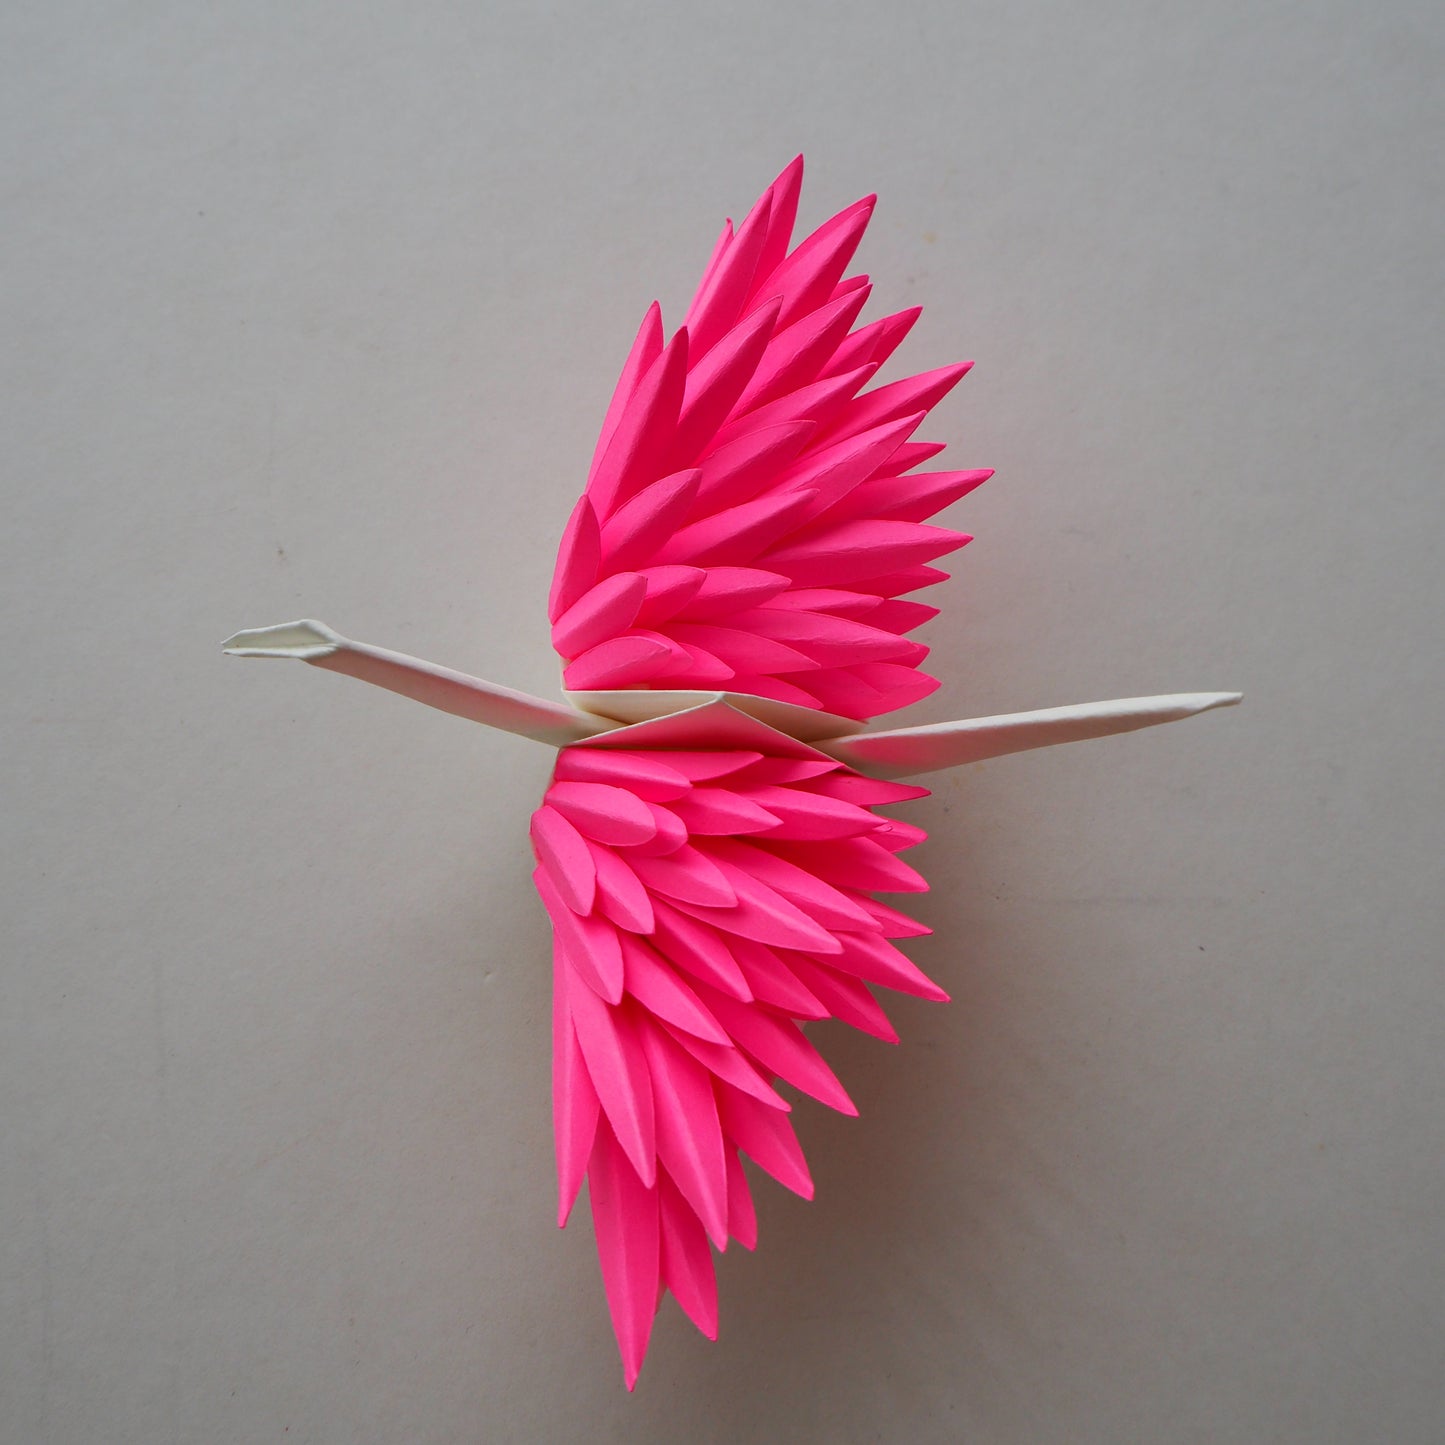 Origami Feathered Crane - Hot Pink